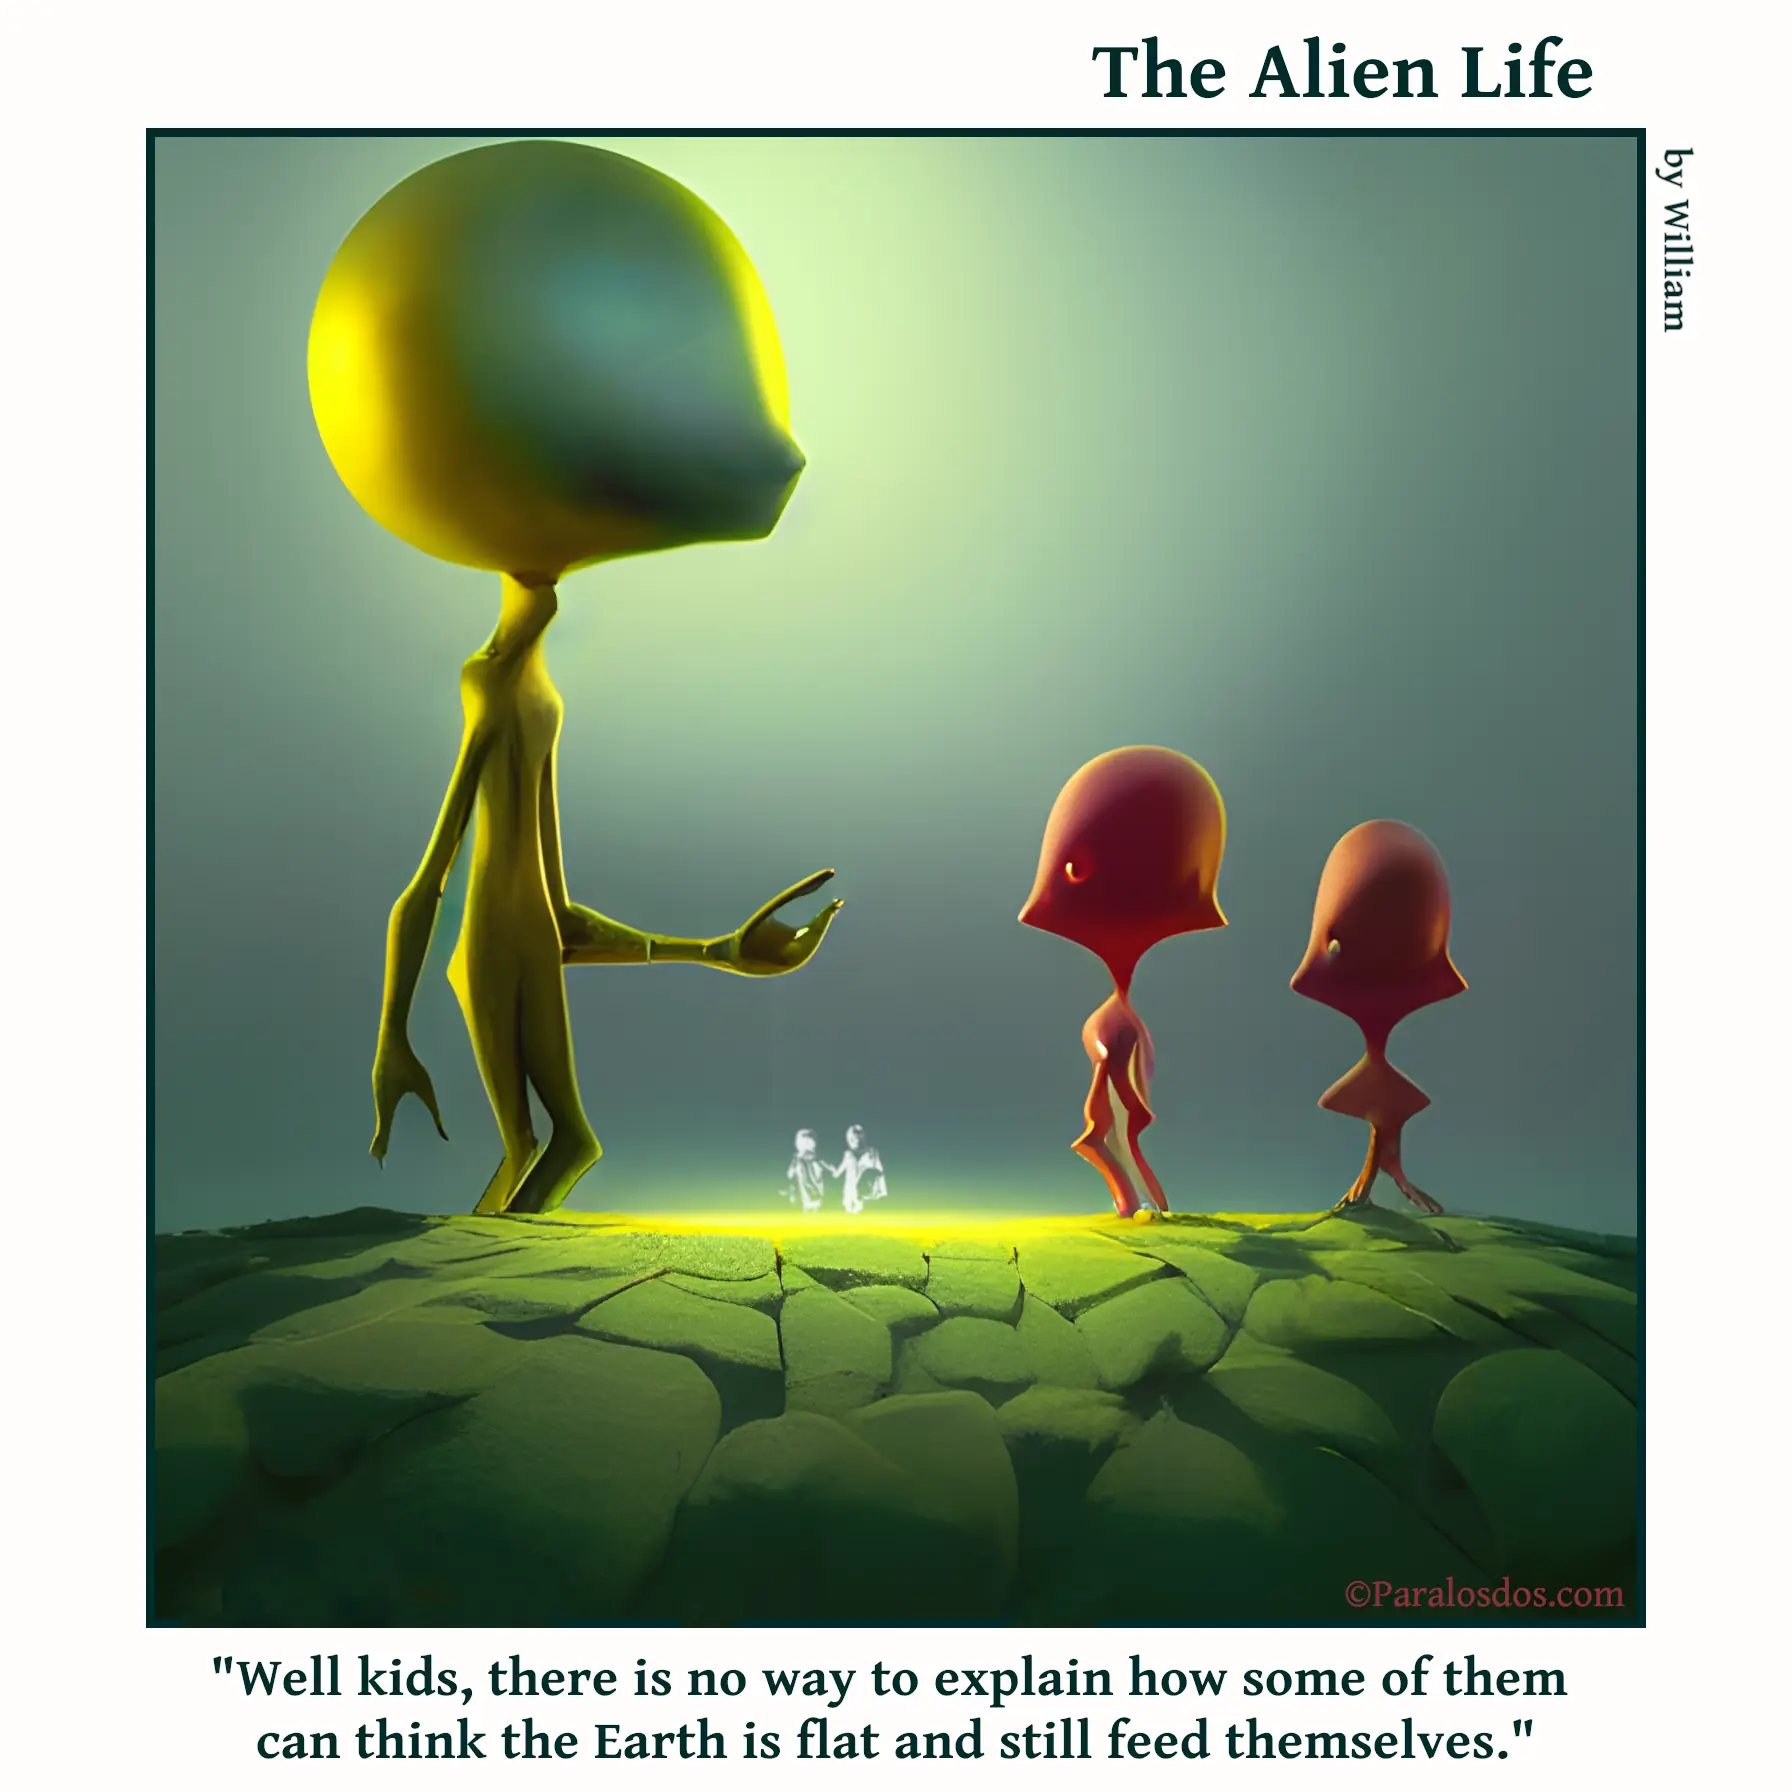 The Alien Life, one panel Comic. An alien parent is talking to two alien children. The caption reads: "Well kids, there is no way to explain how some of them can think the Earth is flat and still feed themselves."